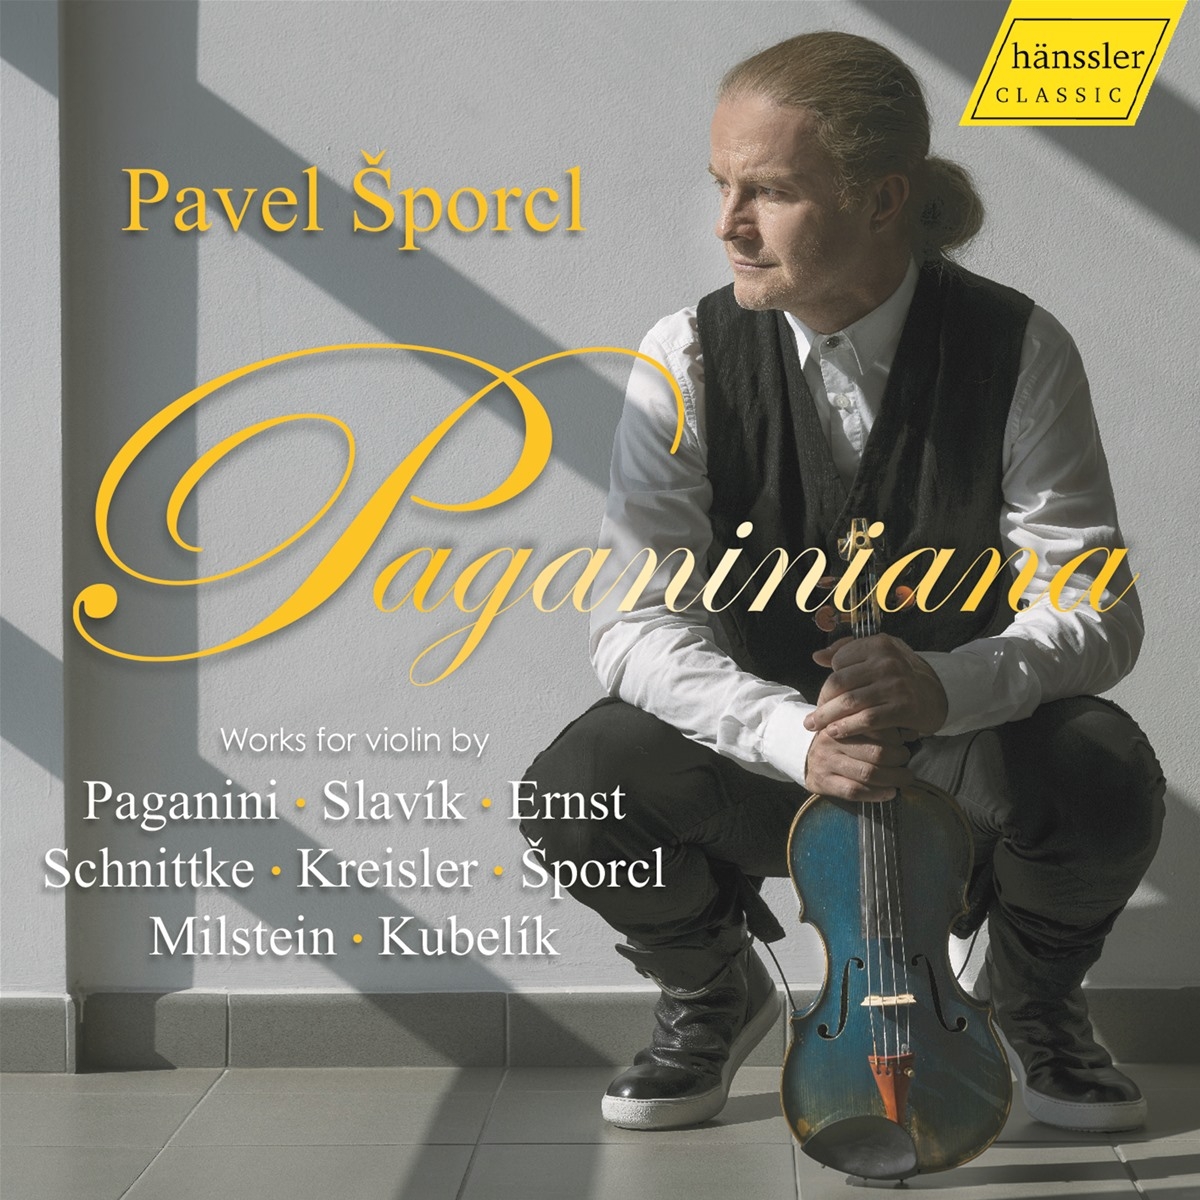 Pavel Sporcl: Paganiniana-Works for violin